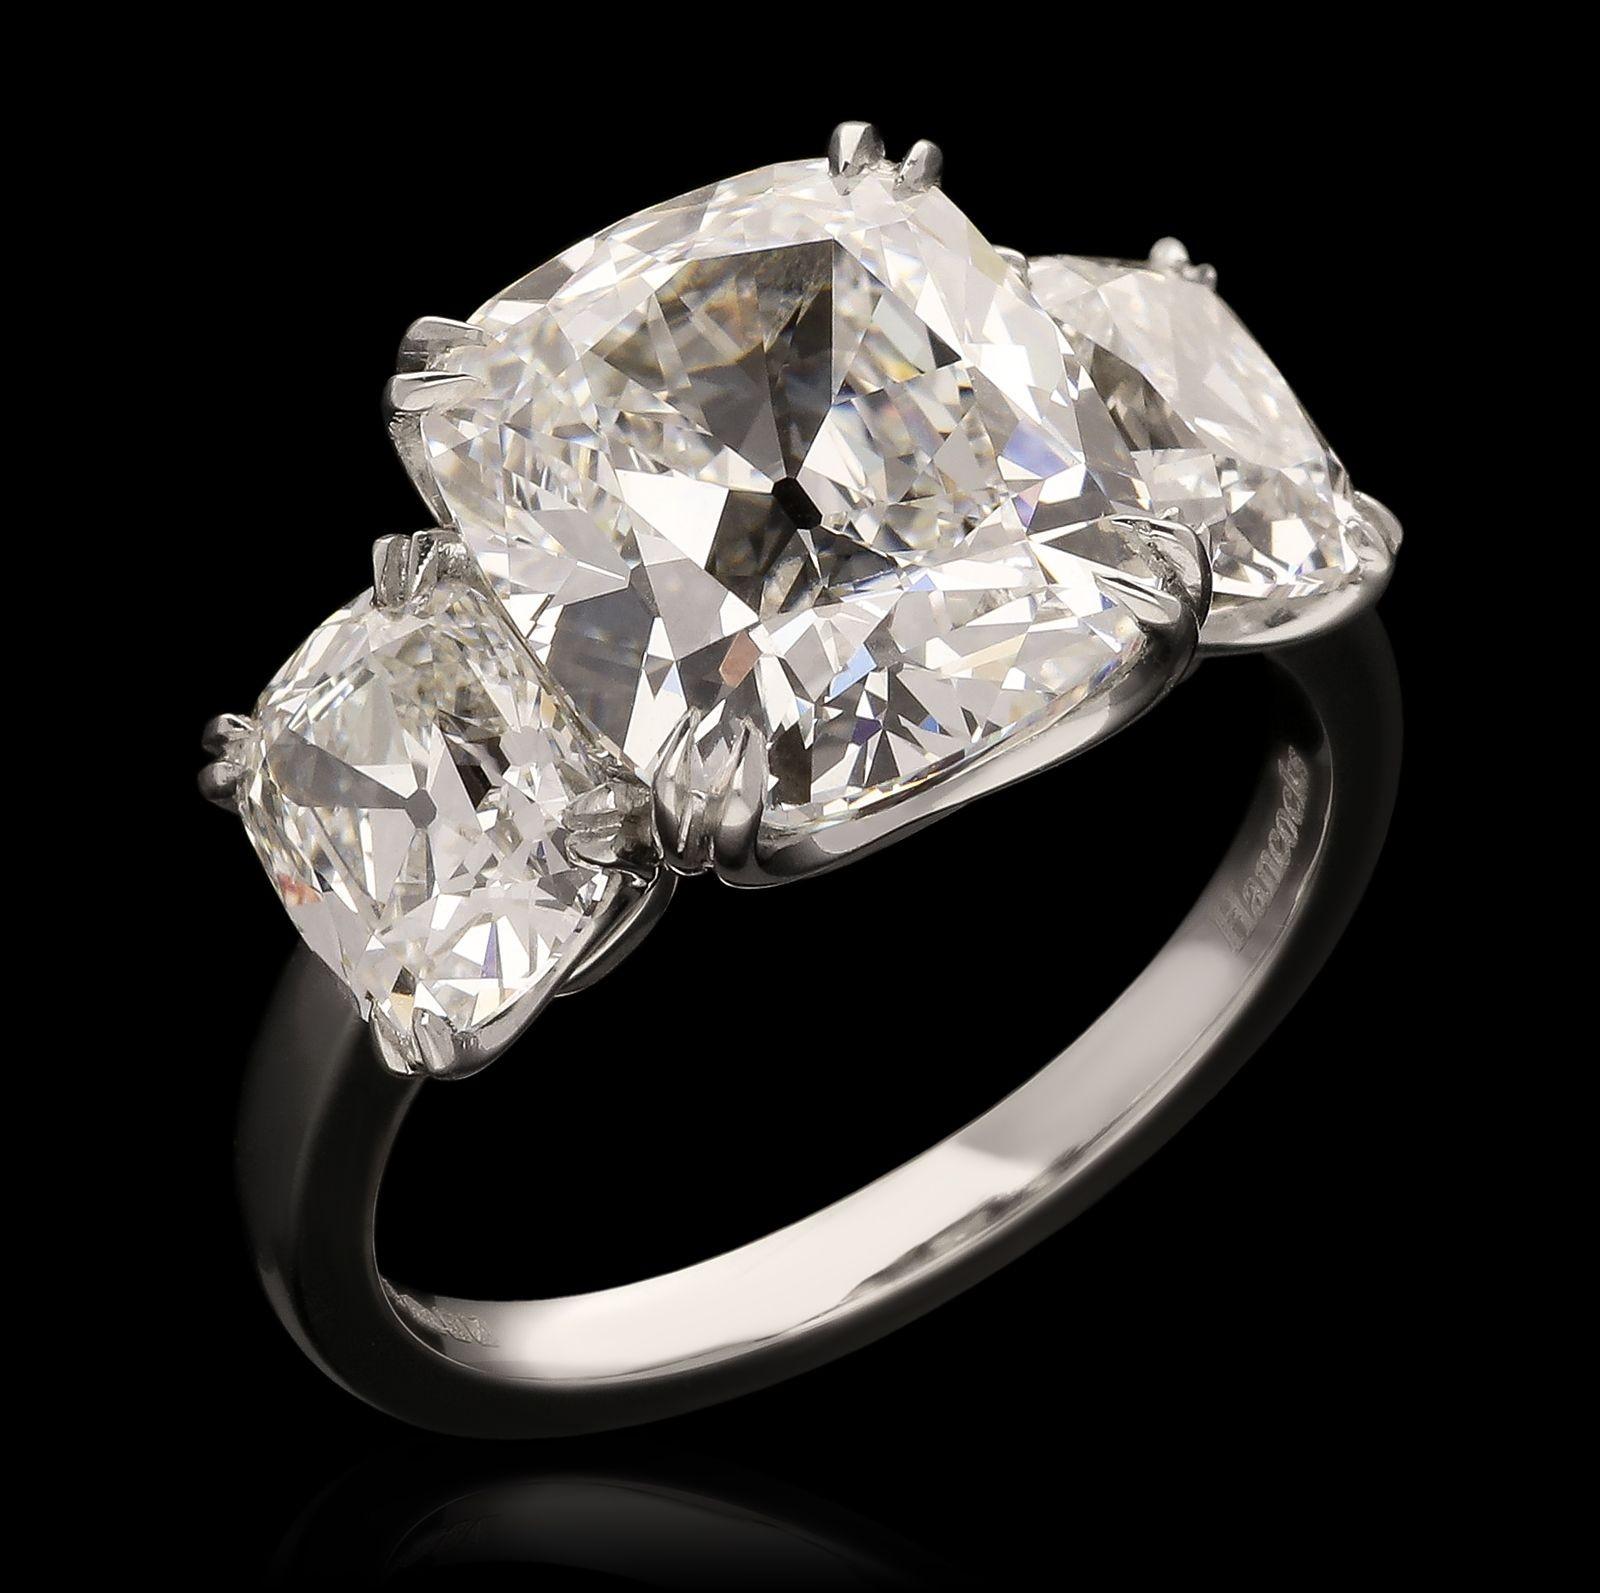 A stunning old-cut diamond and platinum three stone ring by Hancocks, set to the centre with an old mine brilliant cut diamond weighing 5.02cts and of G colour and VVS2 clarity between two further old mine brilliants of 1.03cts F colour and VS2